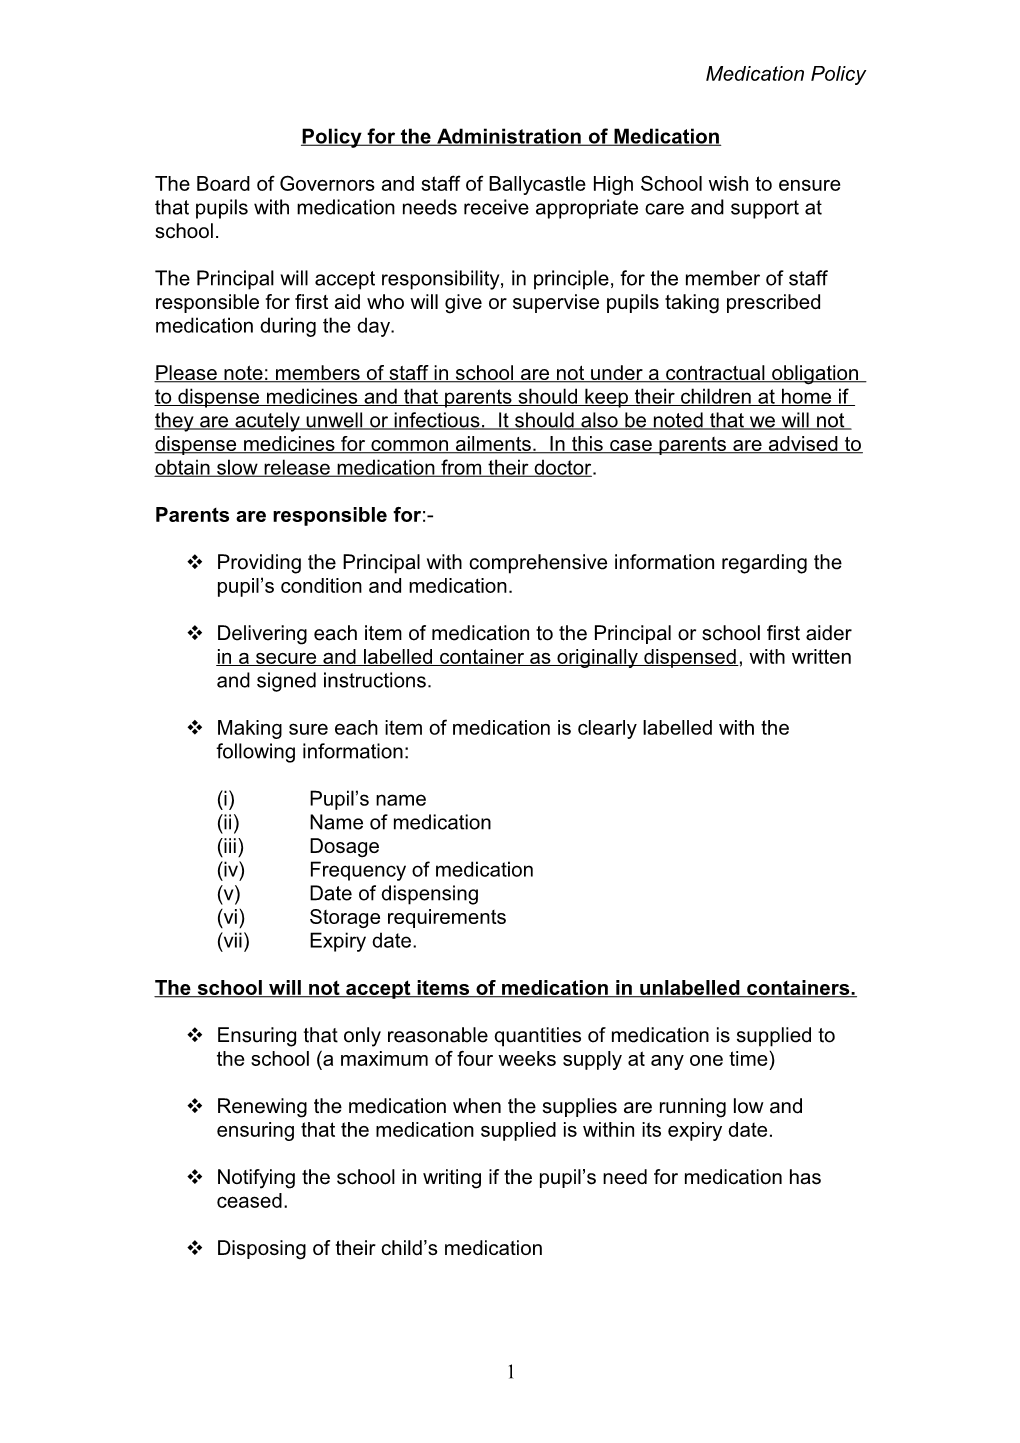 Policy for the Administration of Medication in Ballycastle High School